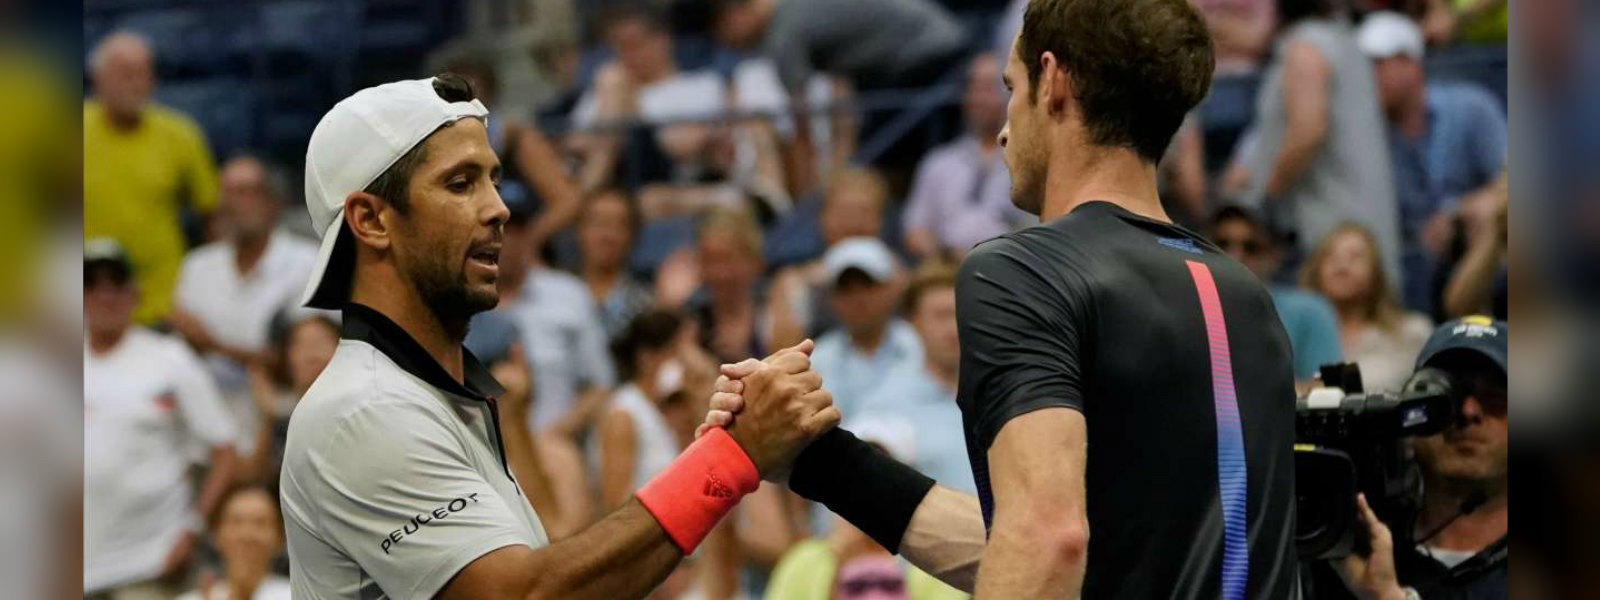 Andy Murray knocked out of U.S. Open by Verdasco